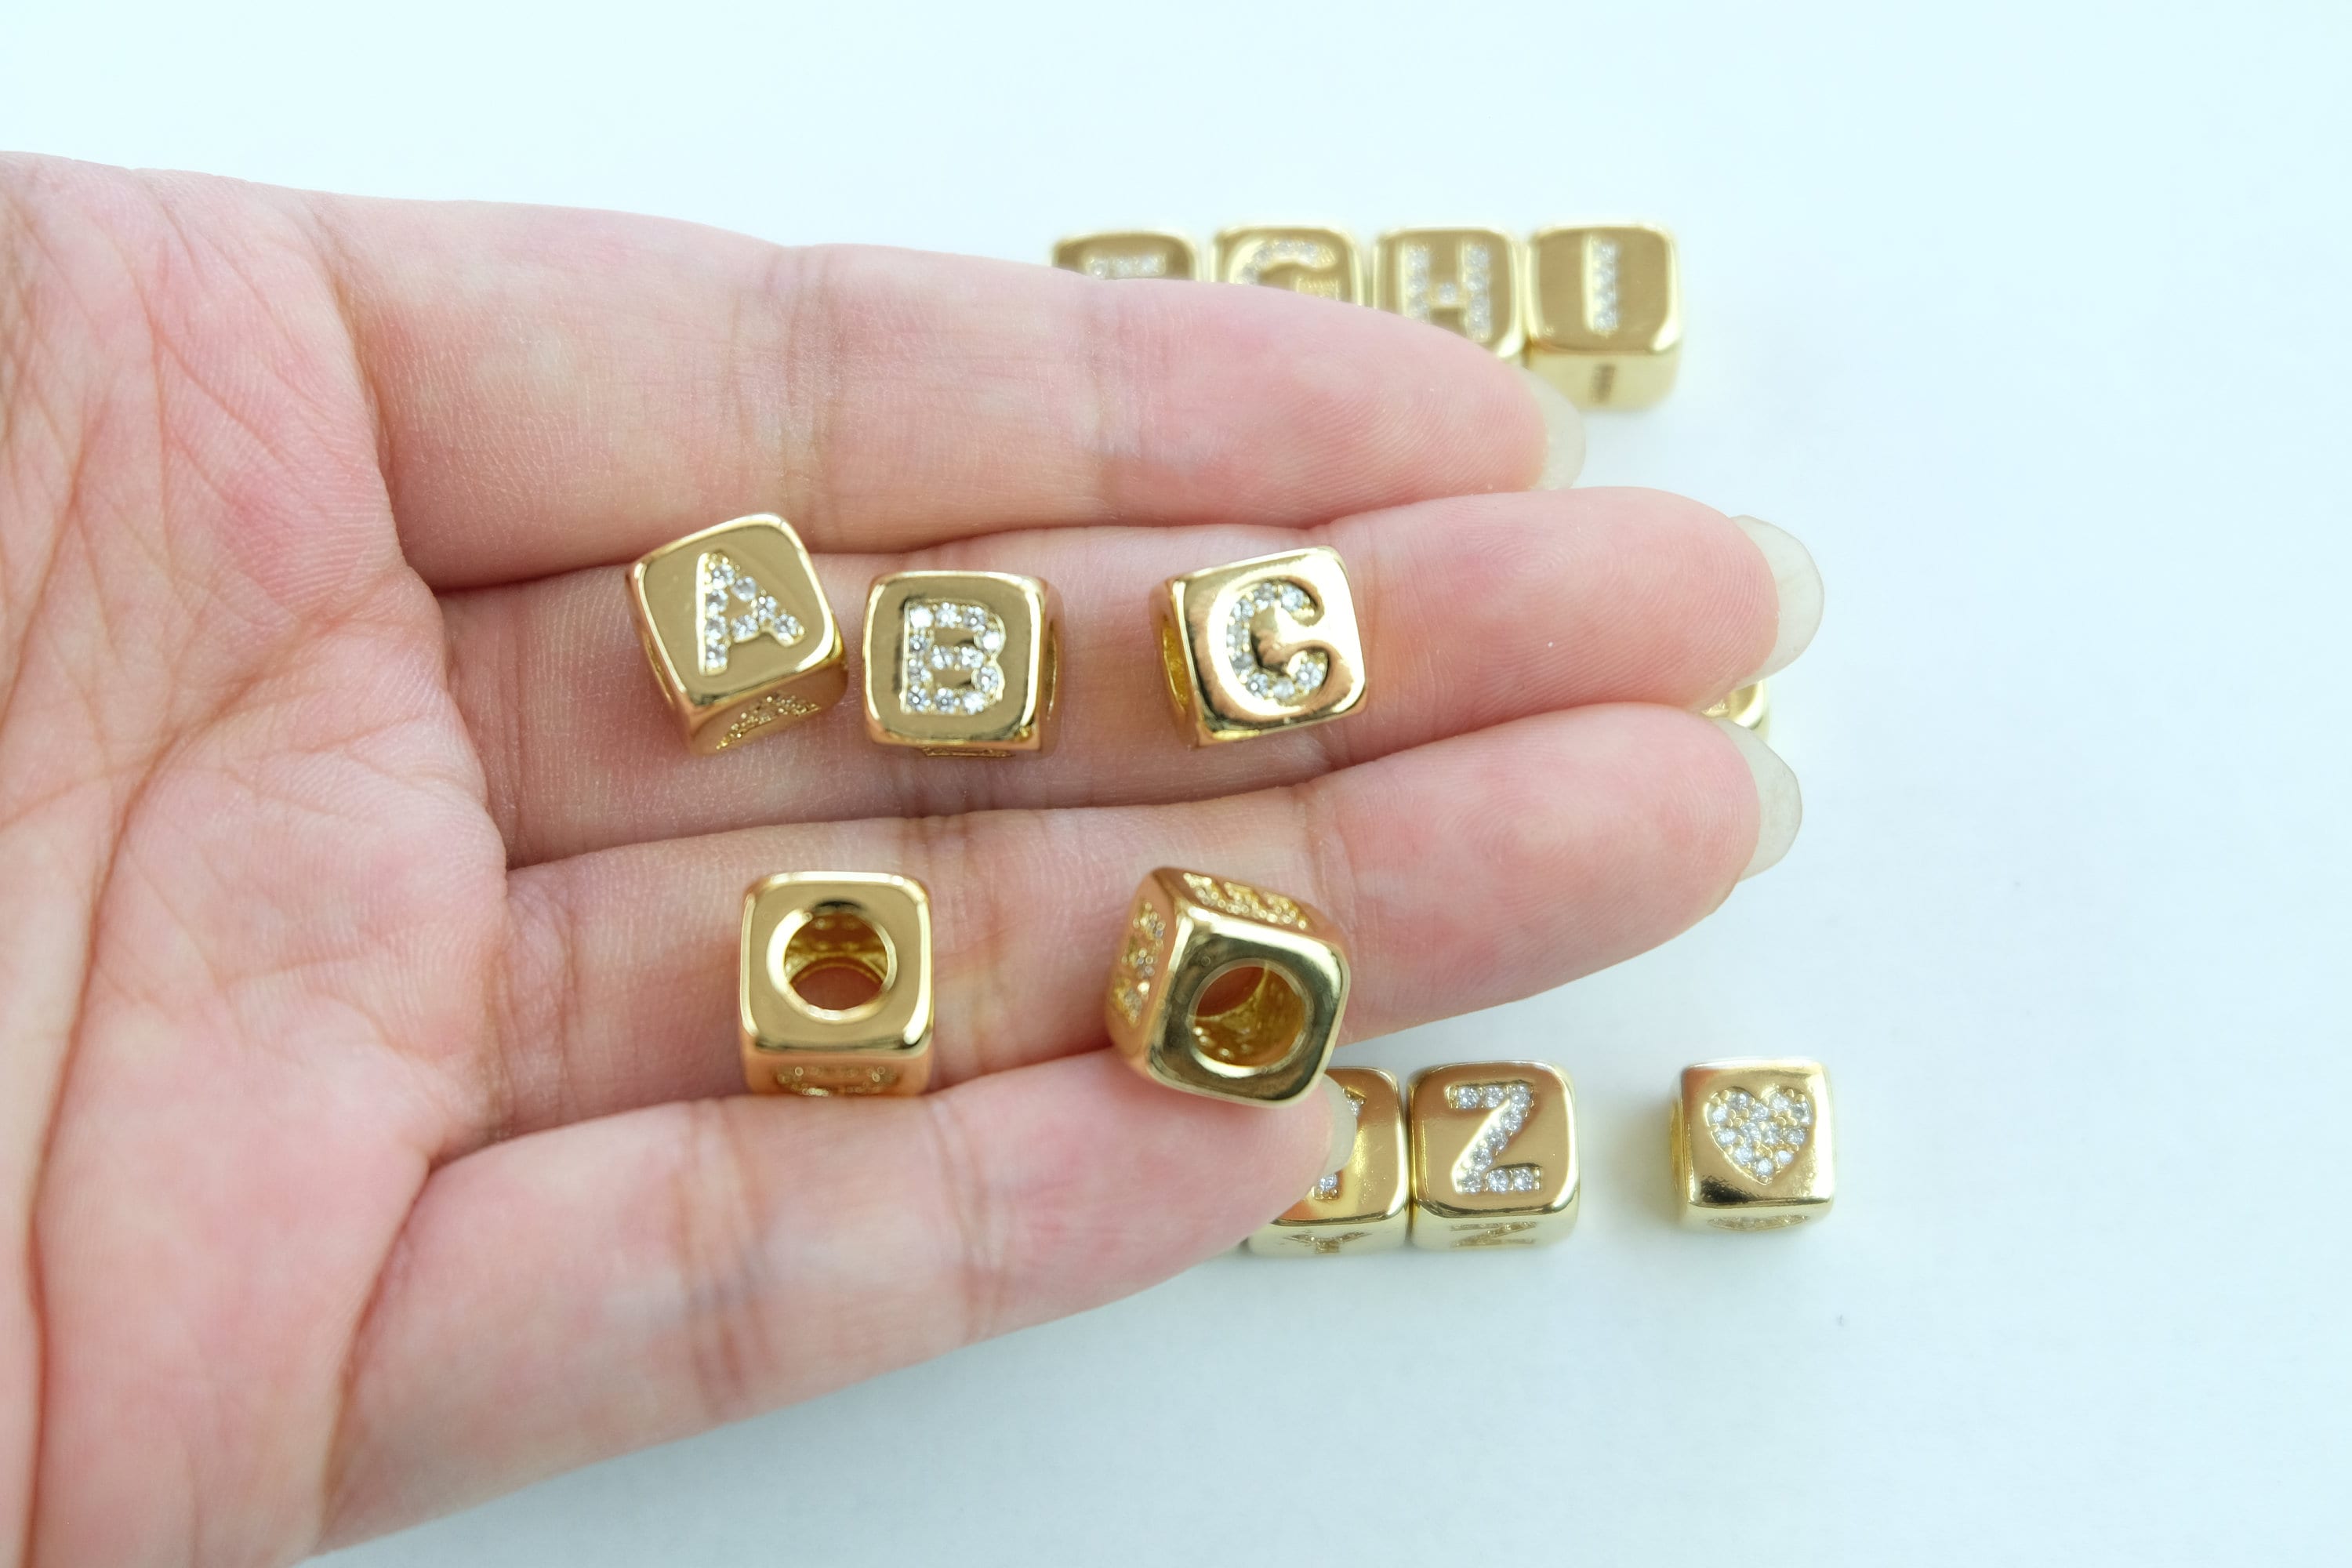 Double Sided Gold Initial Letter Beads, 9x9mm Alphabet Beads, Alphabet  Blocks Micro Pave Cursive Letter Charm for Bracelet Necklace Supply03 